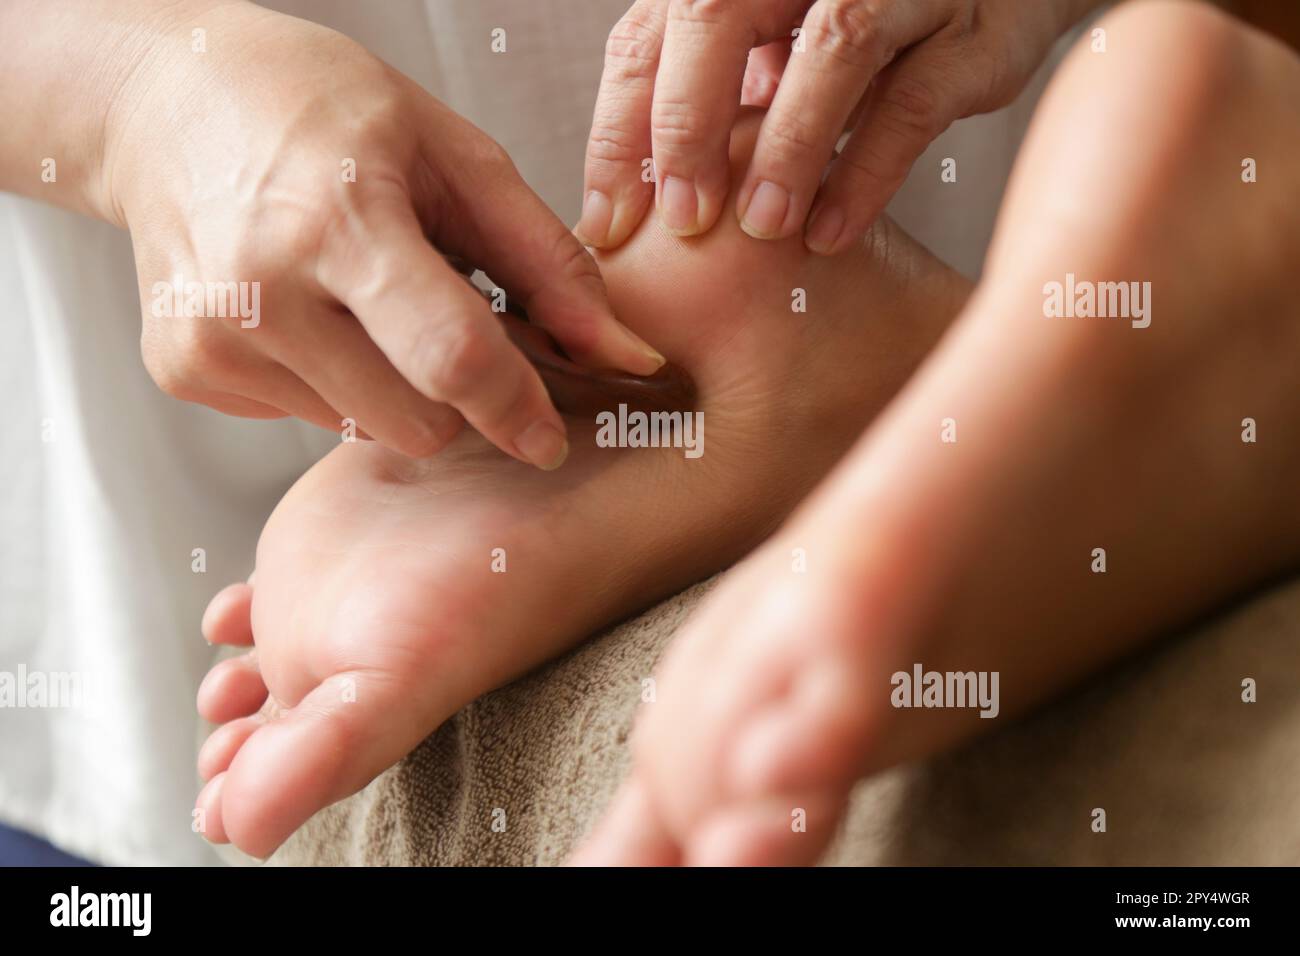 Client receiving acupressure reflexology treatment with wooden points massager stick. Natural medicine, reflexology, acupressure foot massage Stock Photo